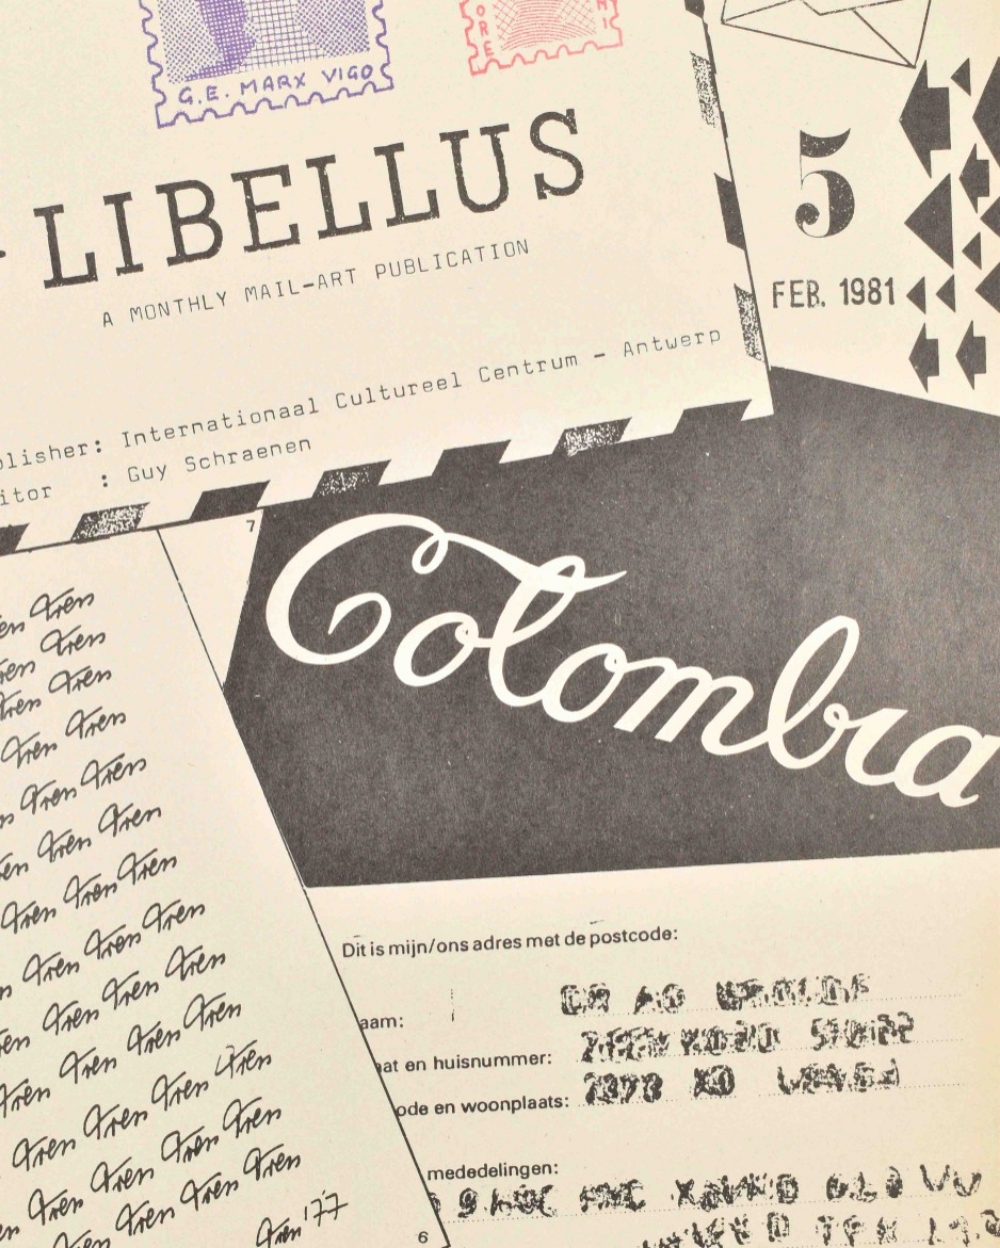 Guy Schraenen, Libellus, A monthly mail-art publication. Complete run Nos.1-12 - Image 7 of 8